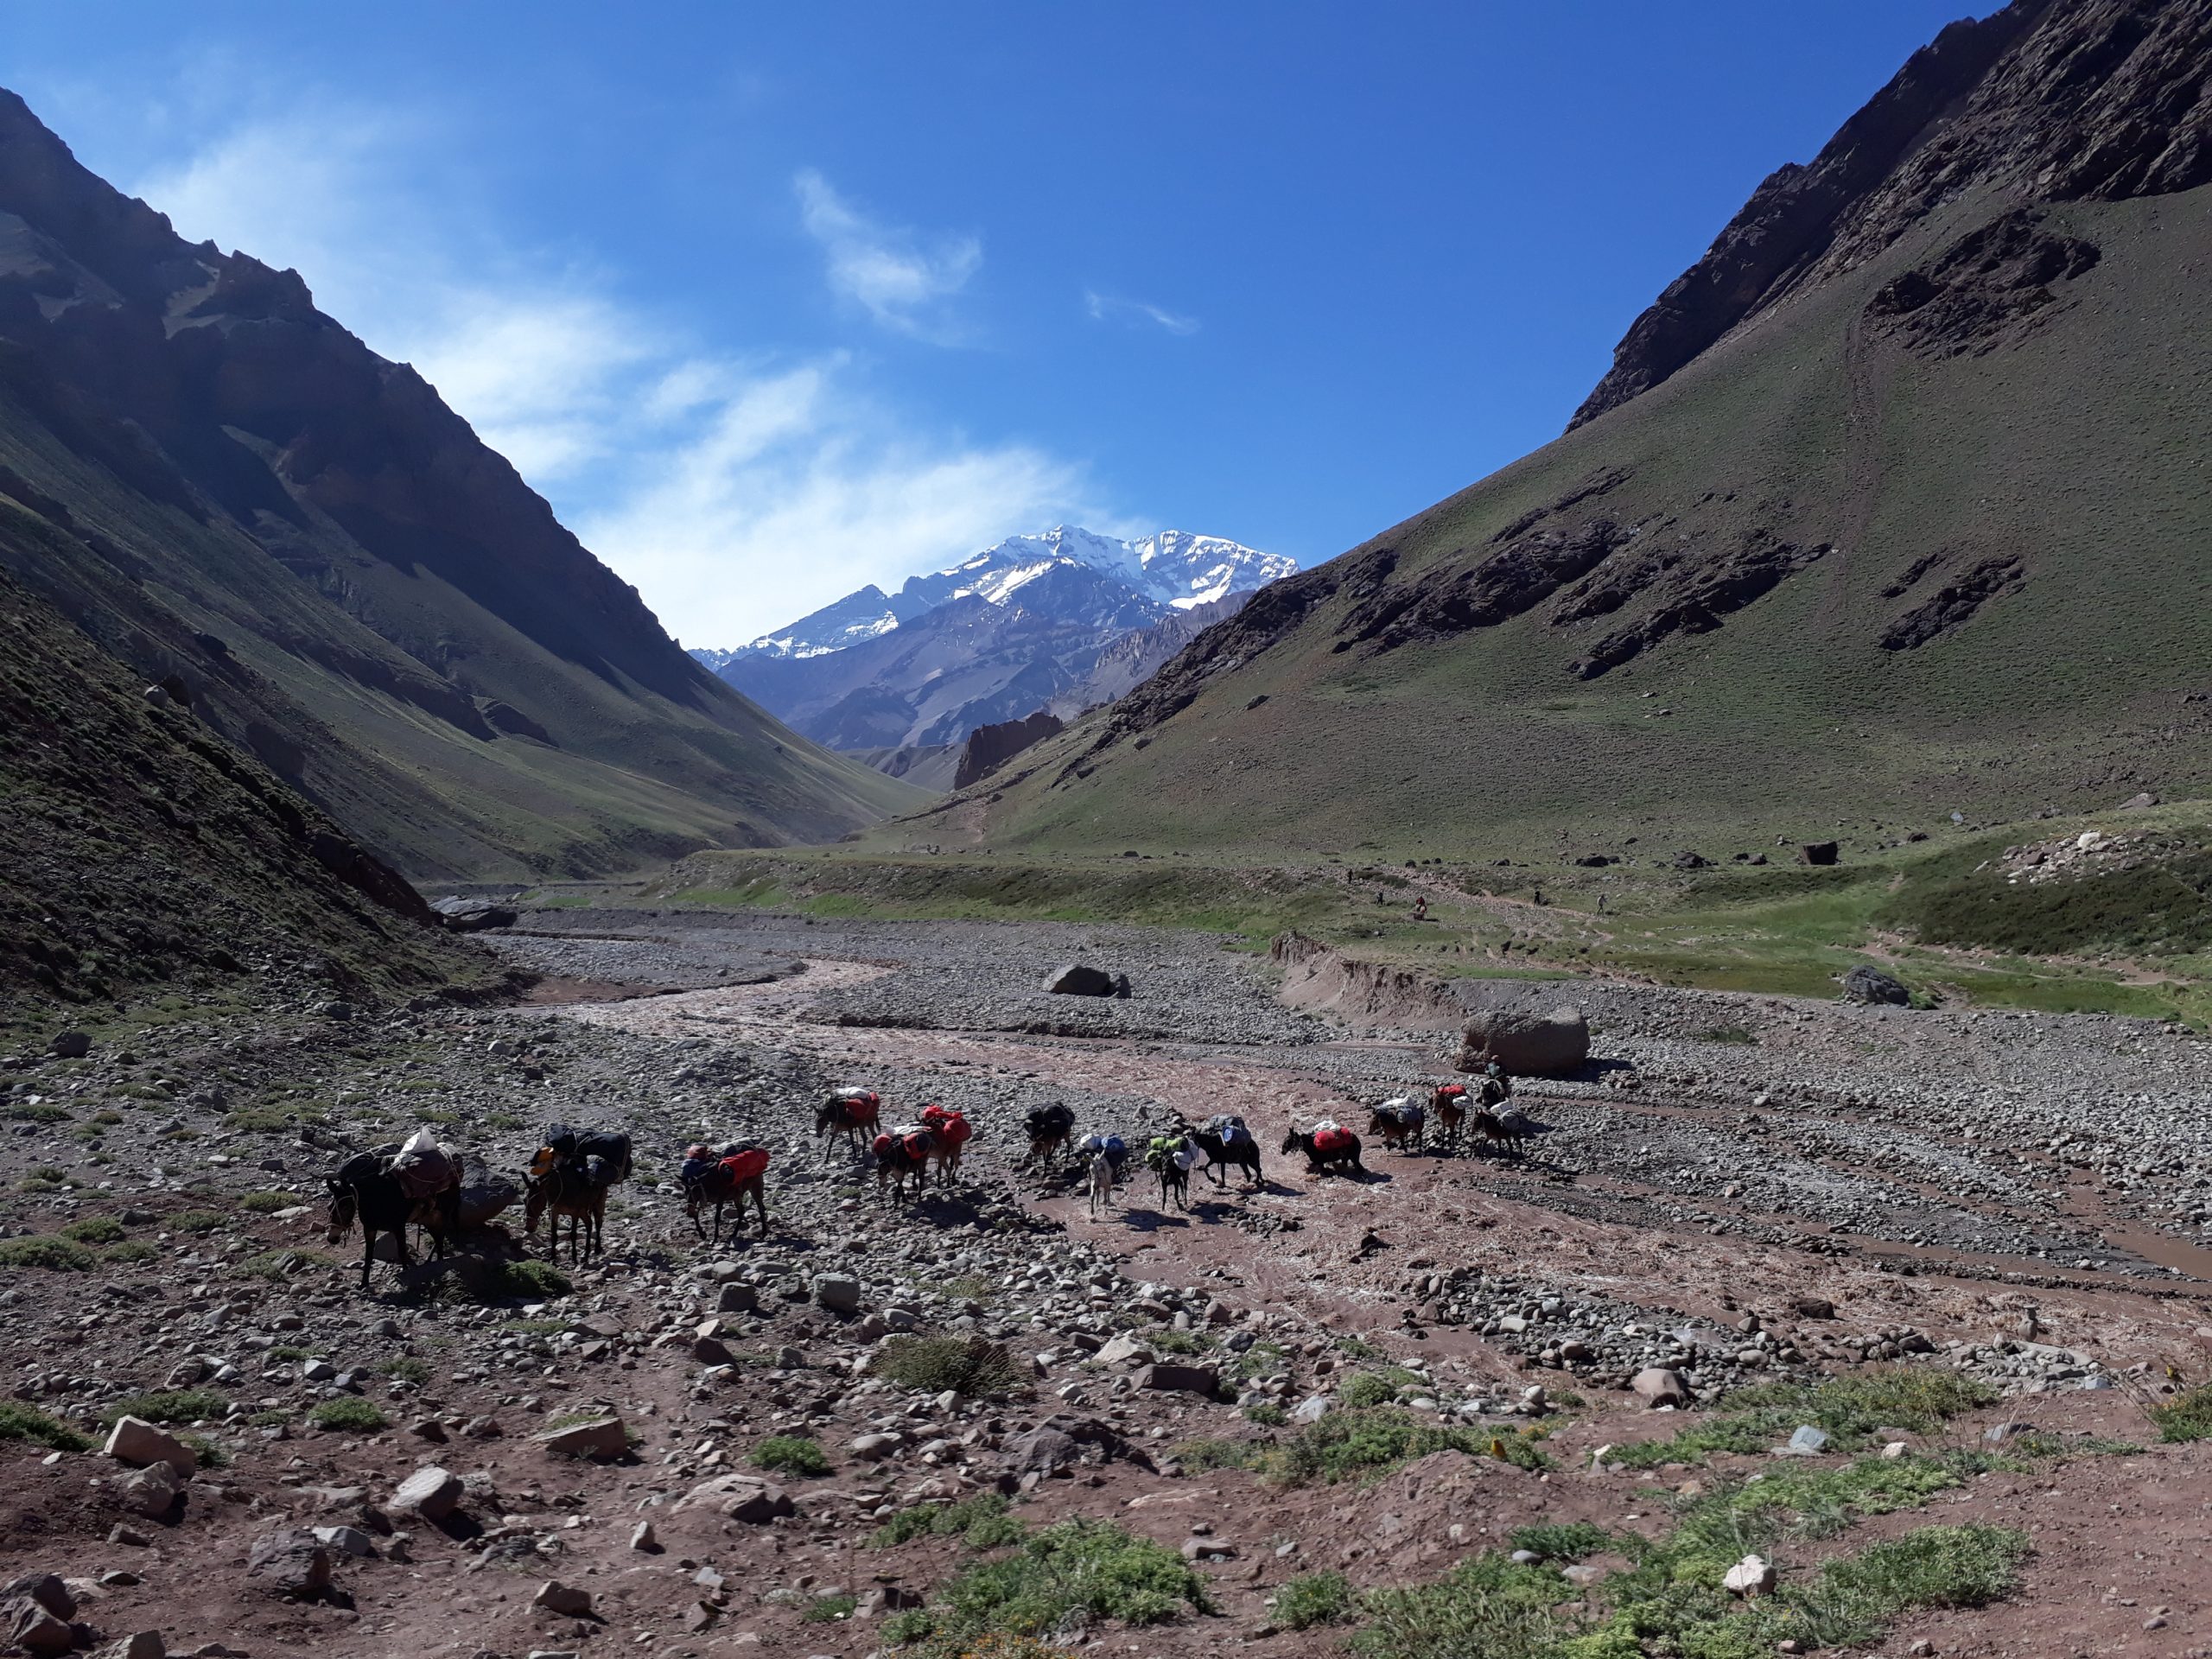 Mules from Aconcagua